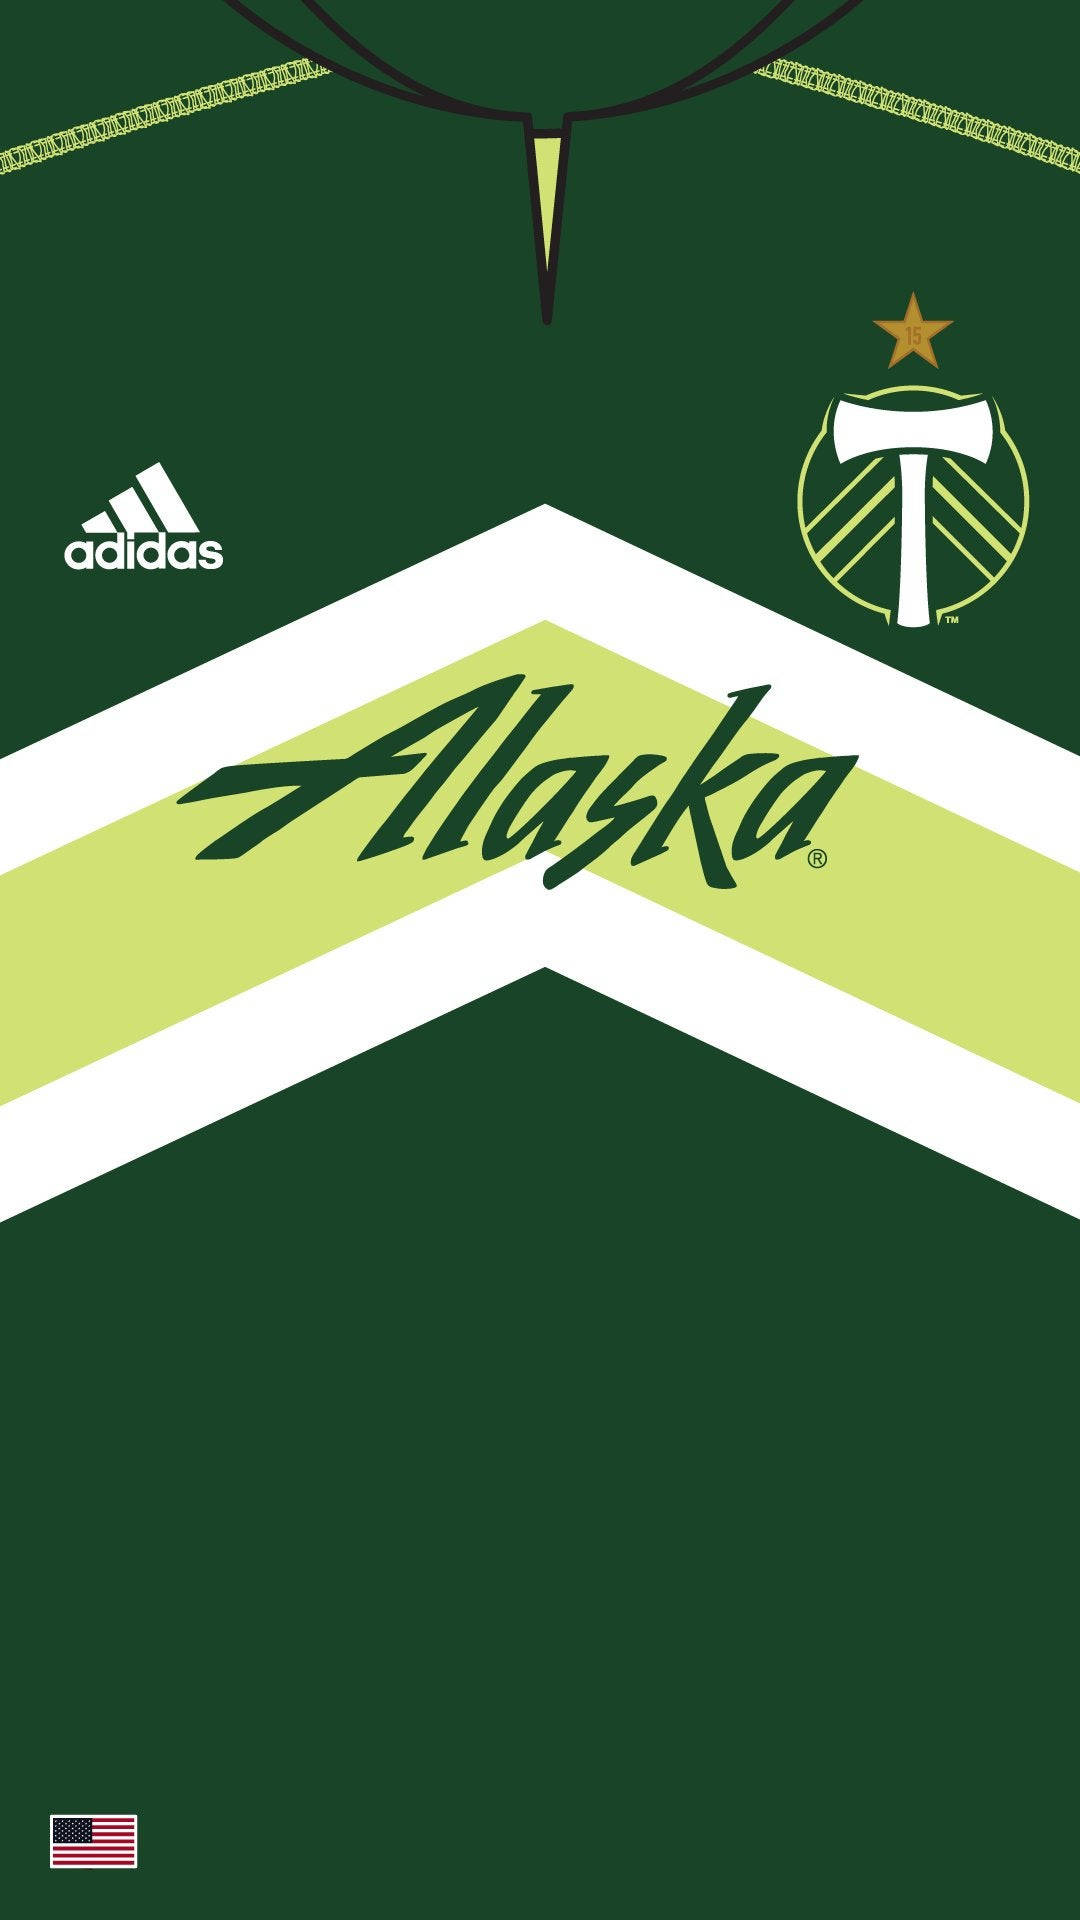 2016 Portland Timbers jerseys now available